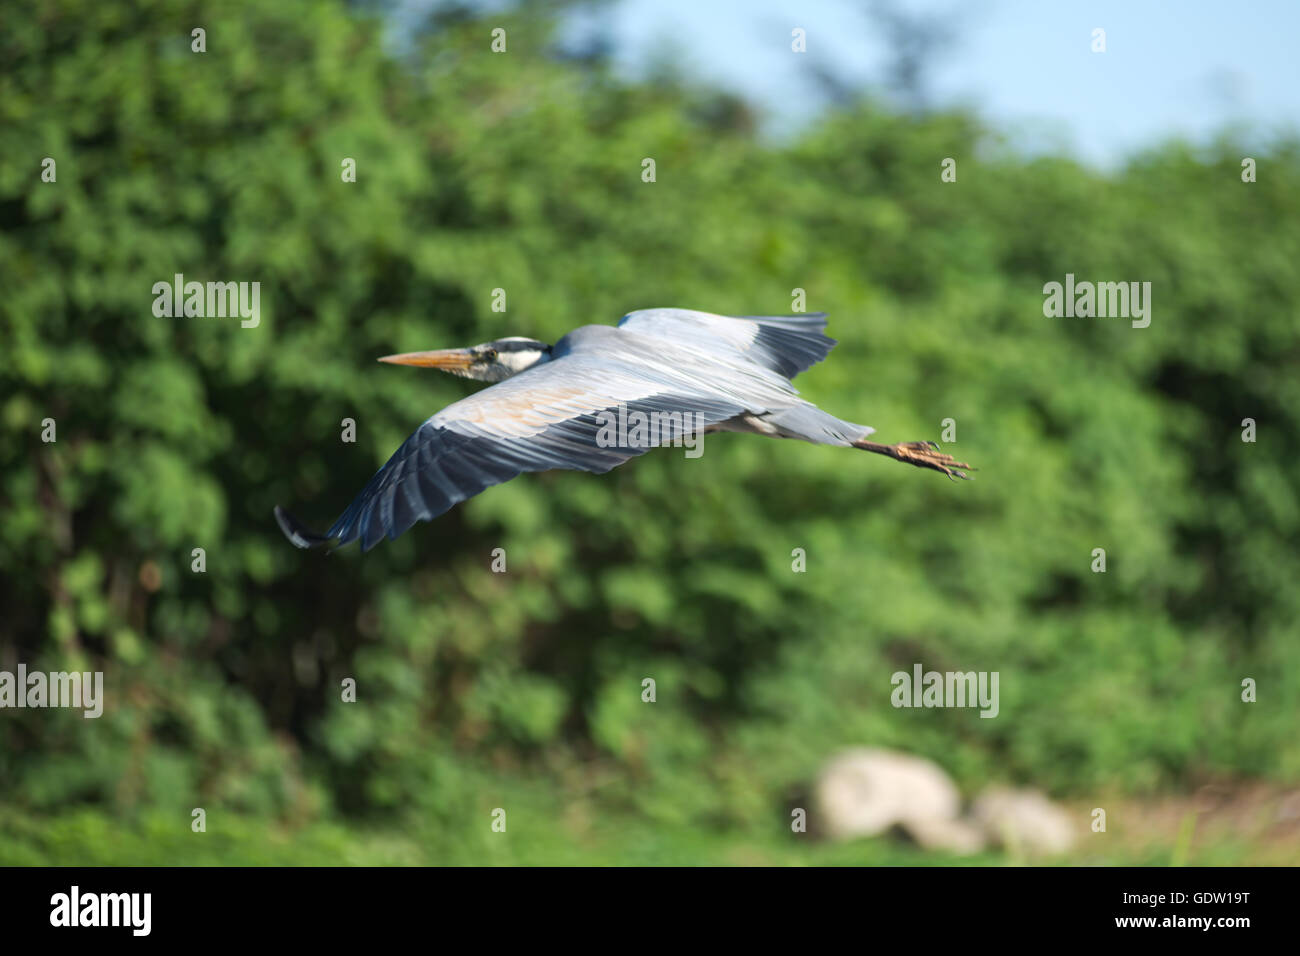 A heron flying in the sky Stock Photo